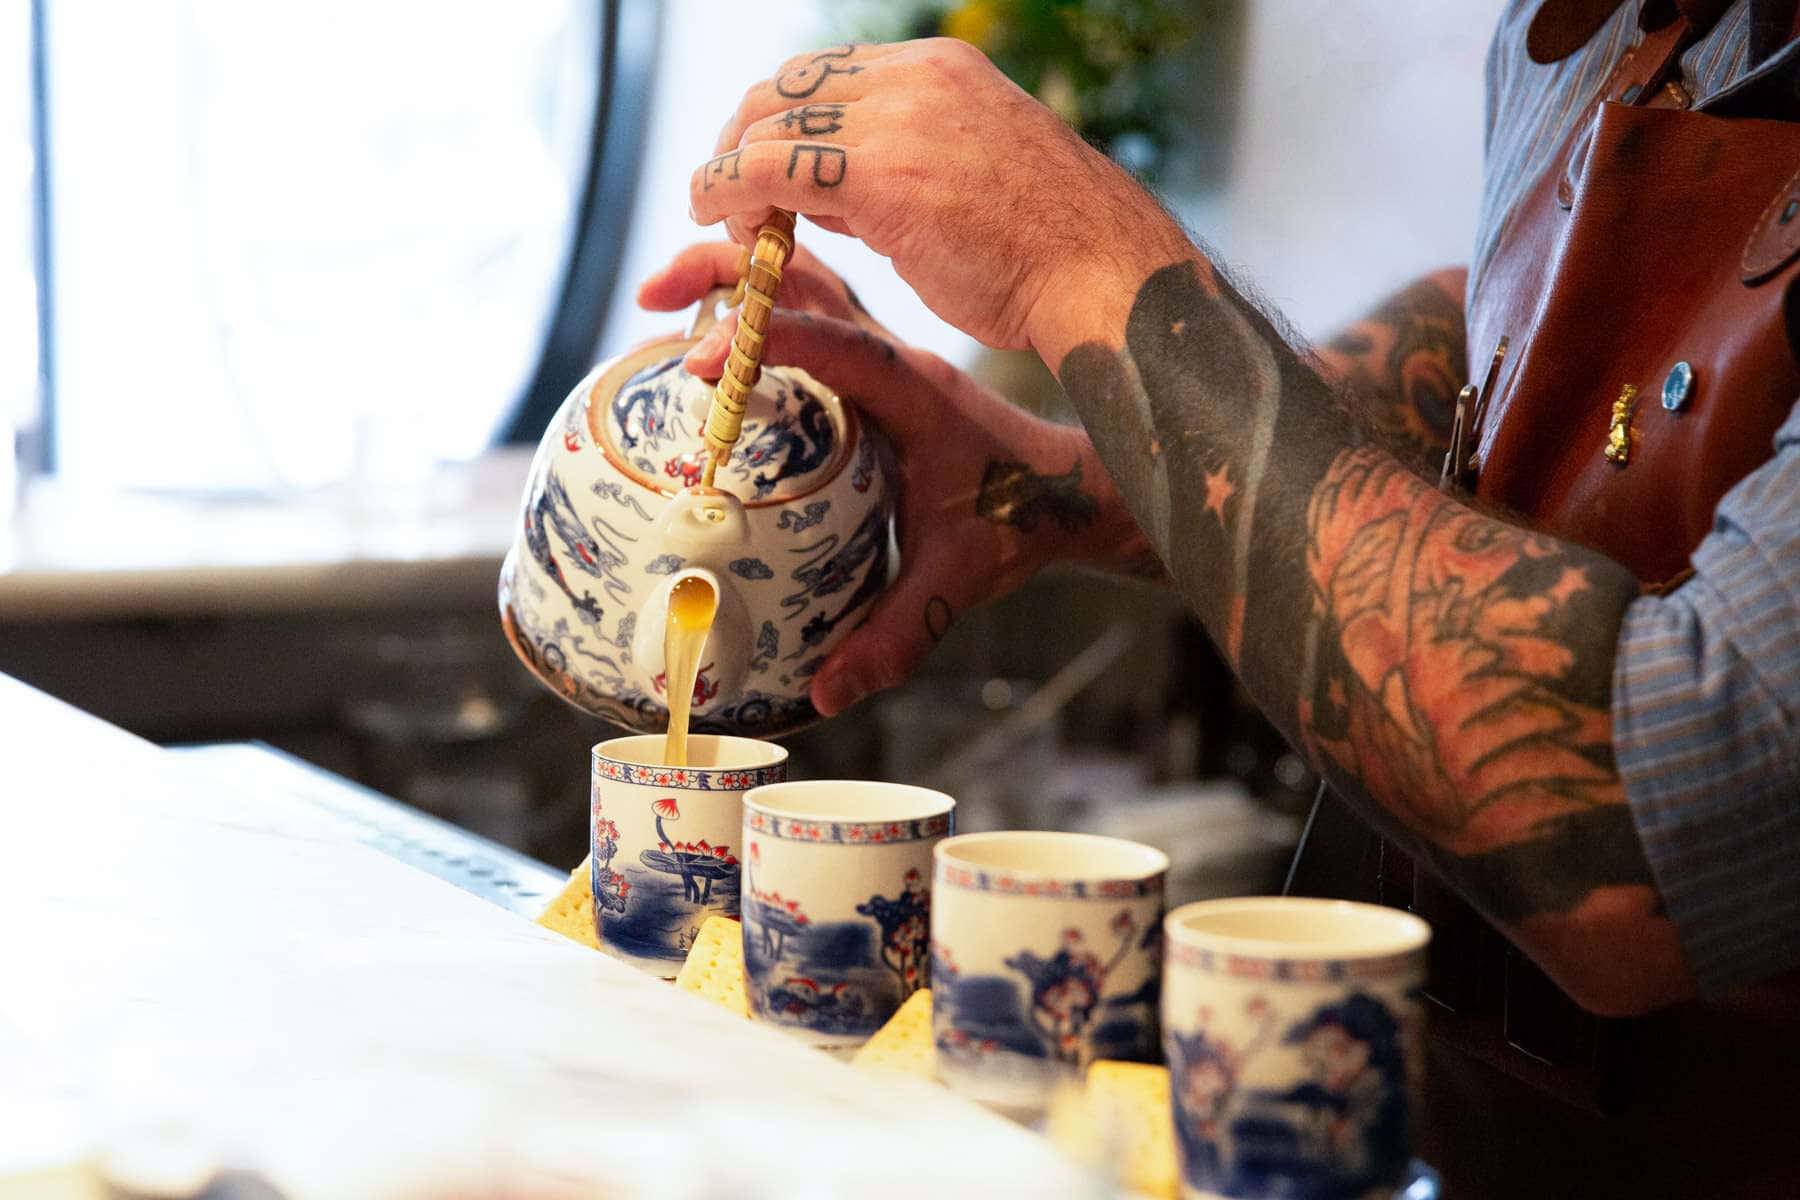 tea-cocktail-being-pored-by-tattooed-bartender